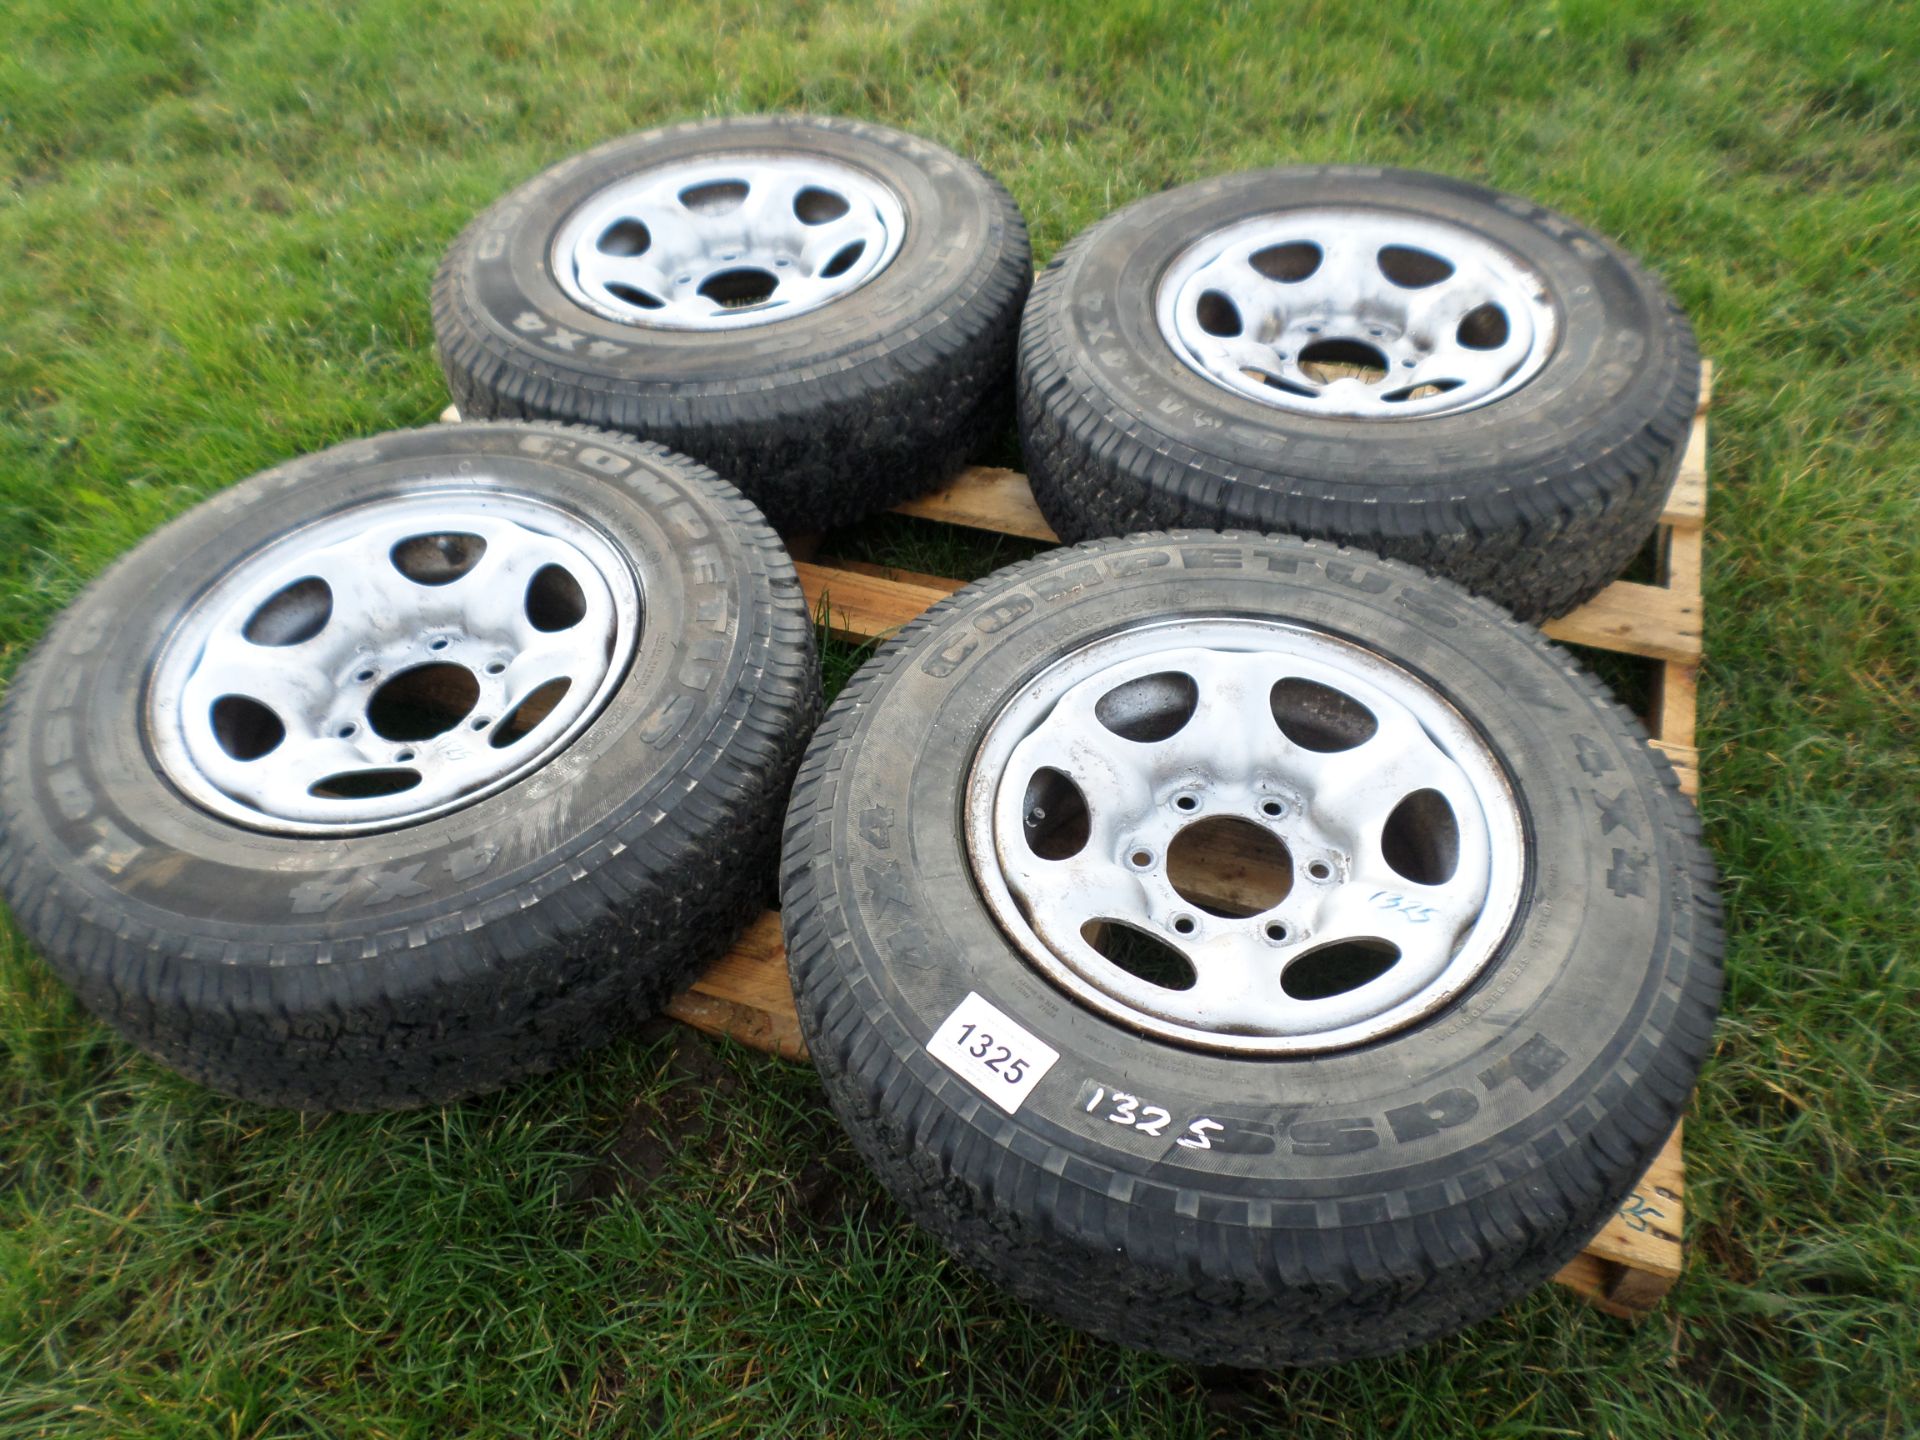 Set of 4 wheels/tyres for Toyota 215/80/16, all inflated and sound